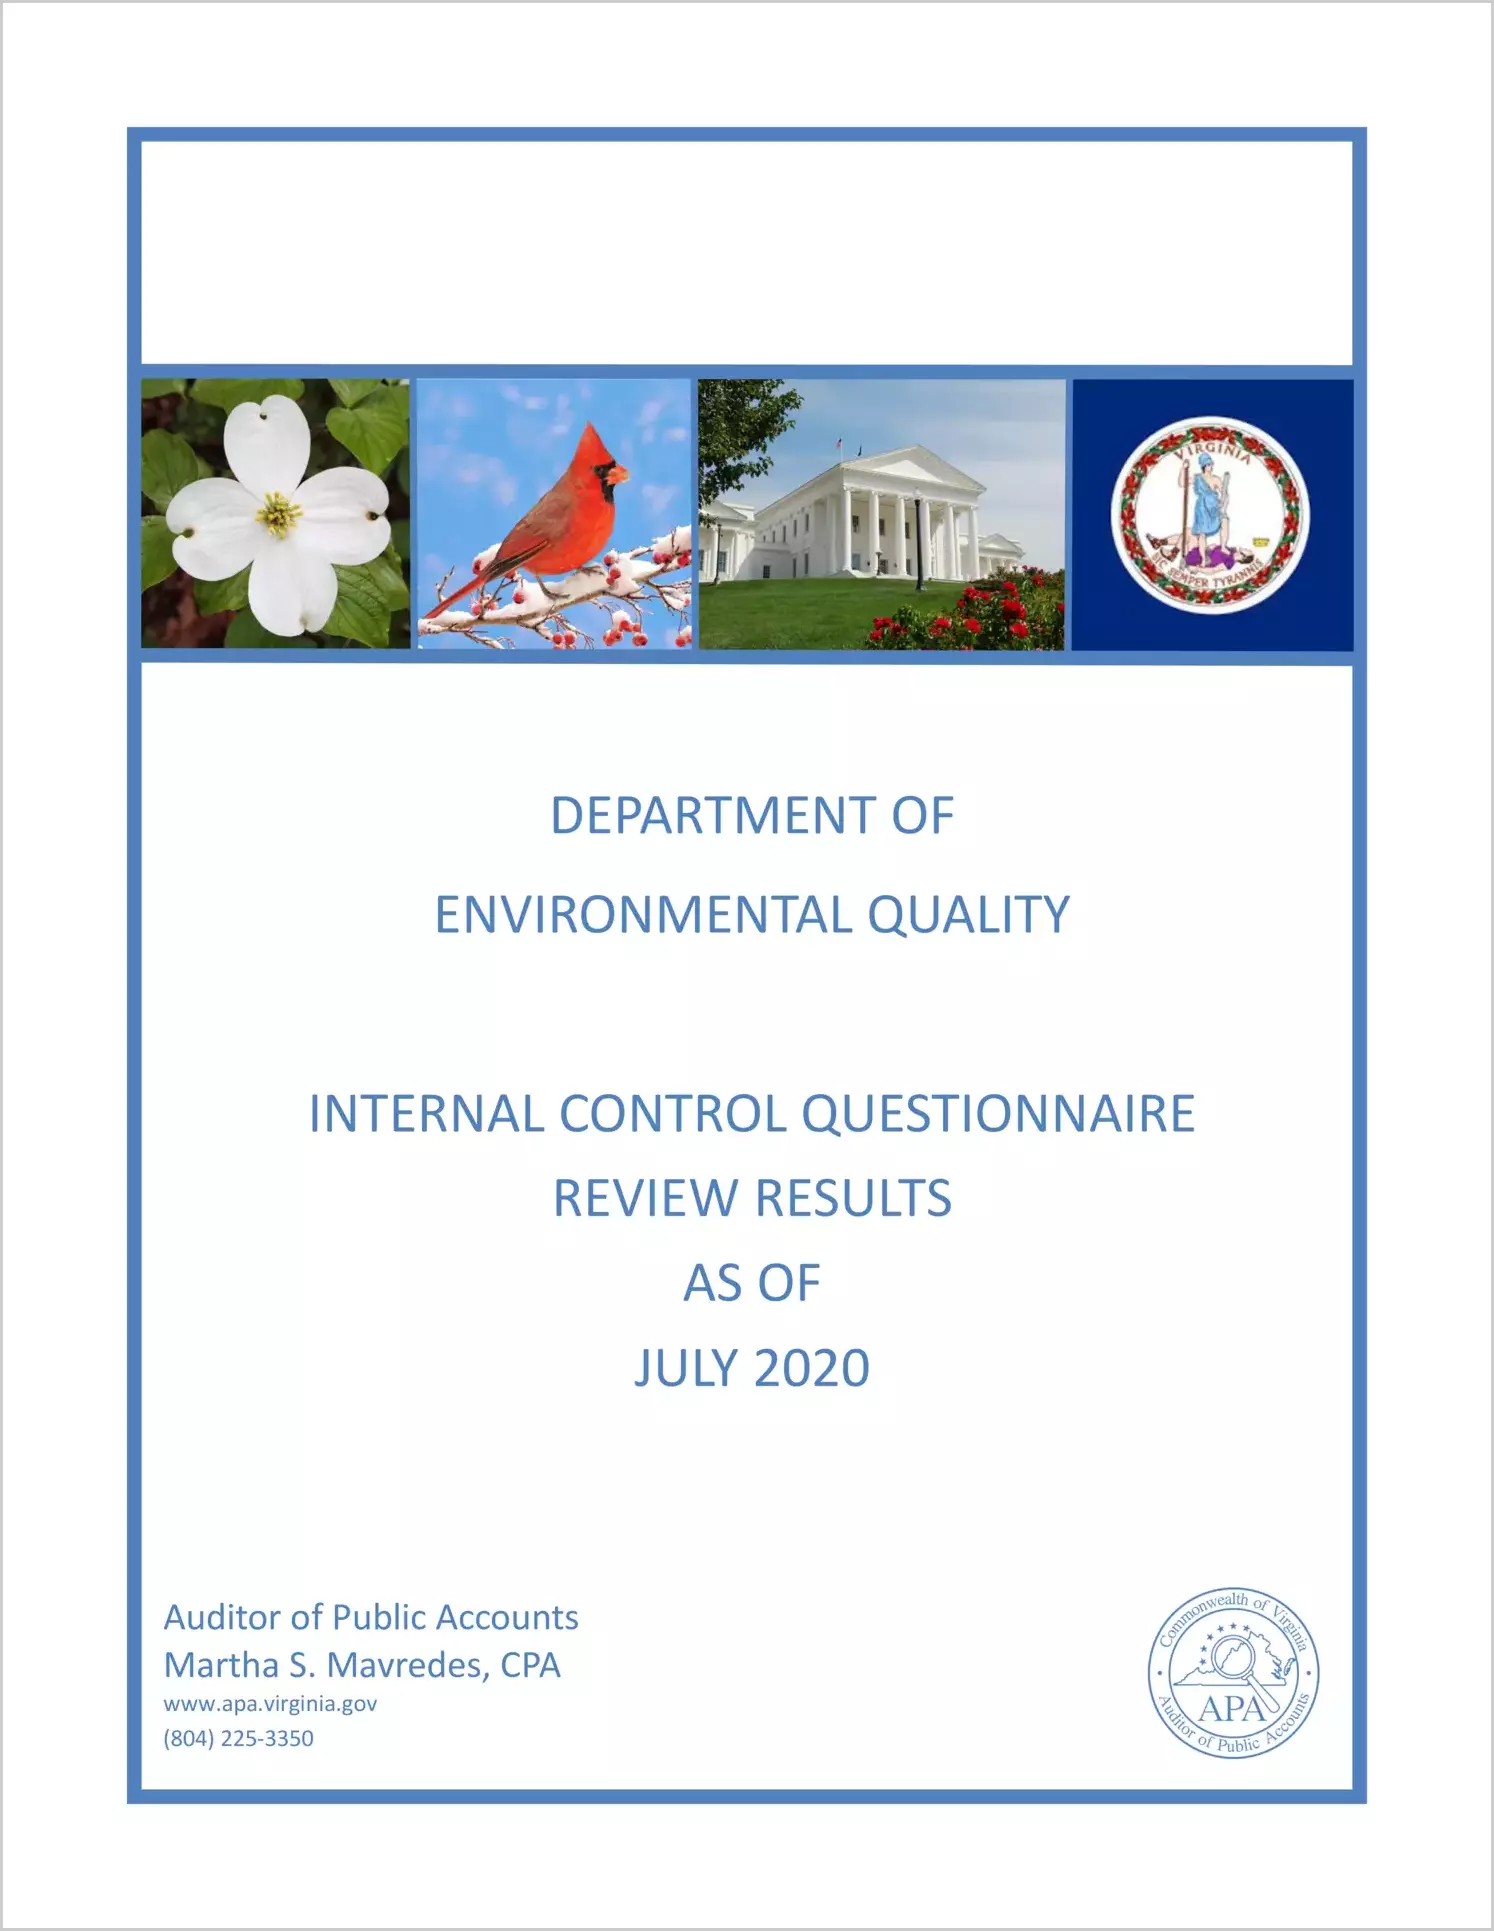 Department of Environmental Quality Internal Control Questionnaire Review Results as of July 2020